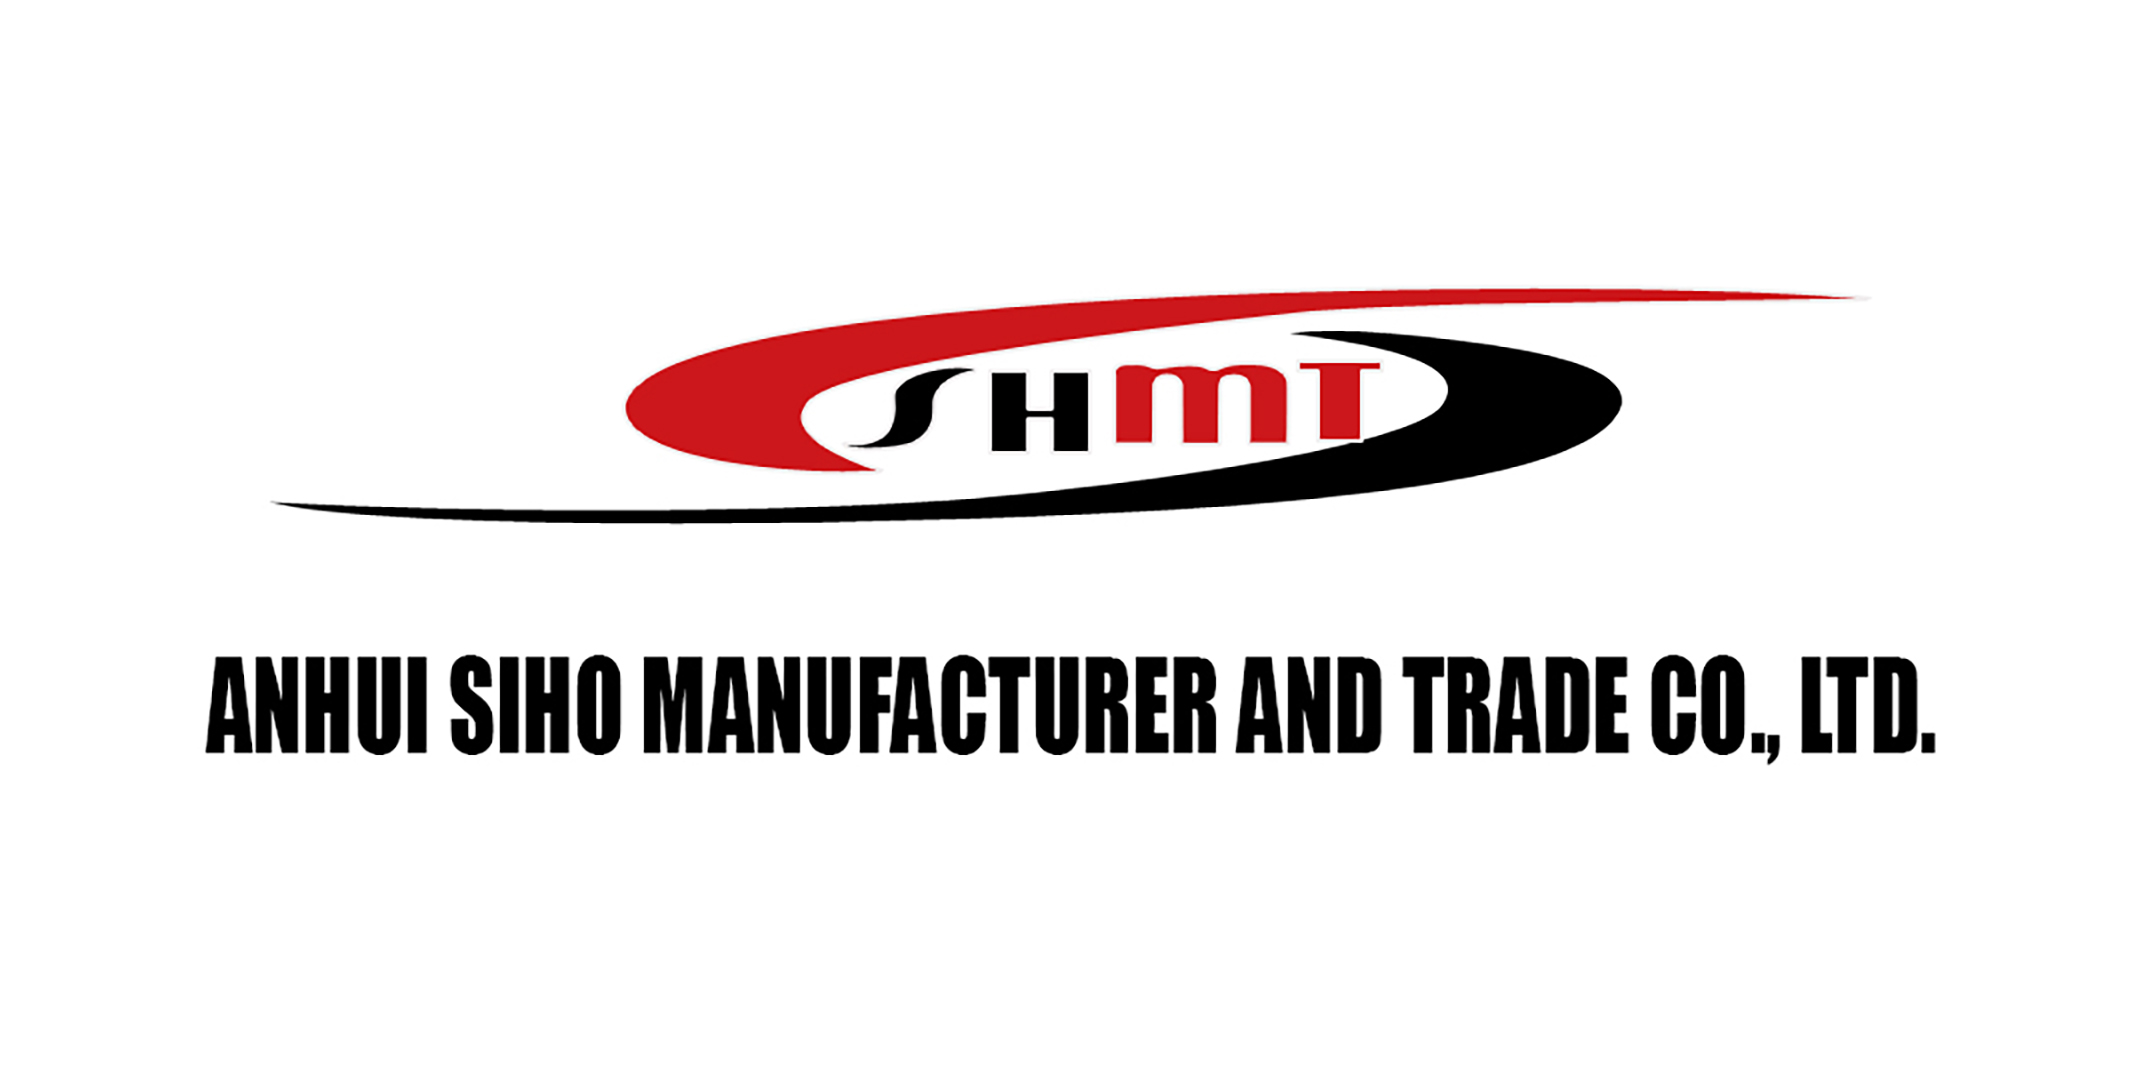 ANHUI SIHO MANUFACTURER AND TRADING CO., LTD.